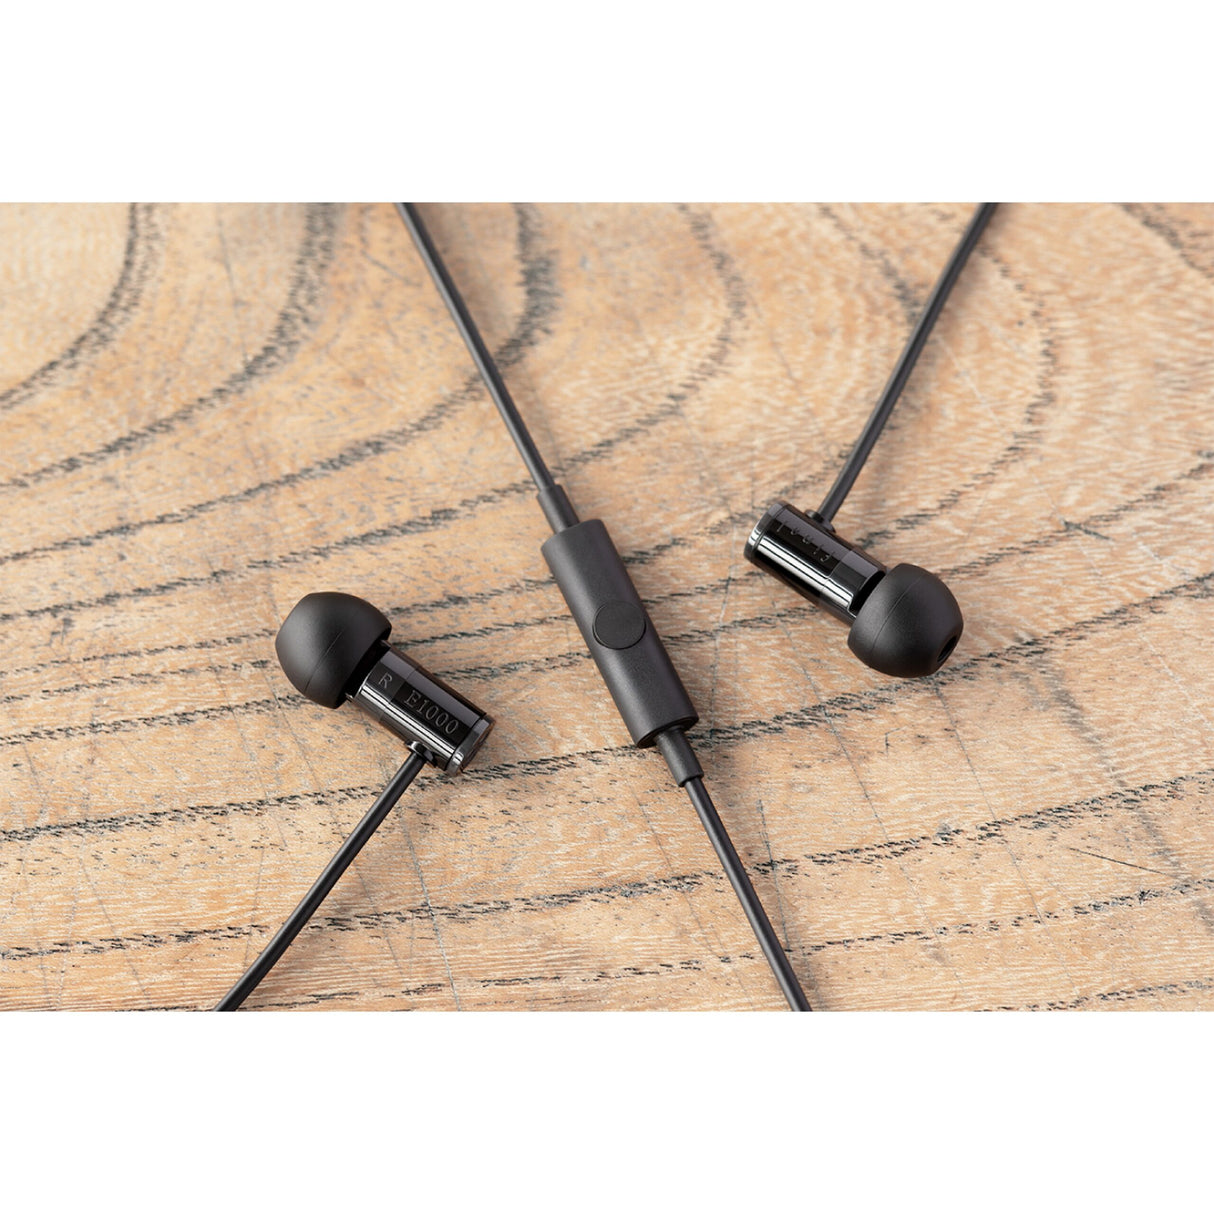 Final Audio E1000C In-Ear Noise Isolating Earphones with Microphone, Black